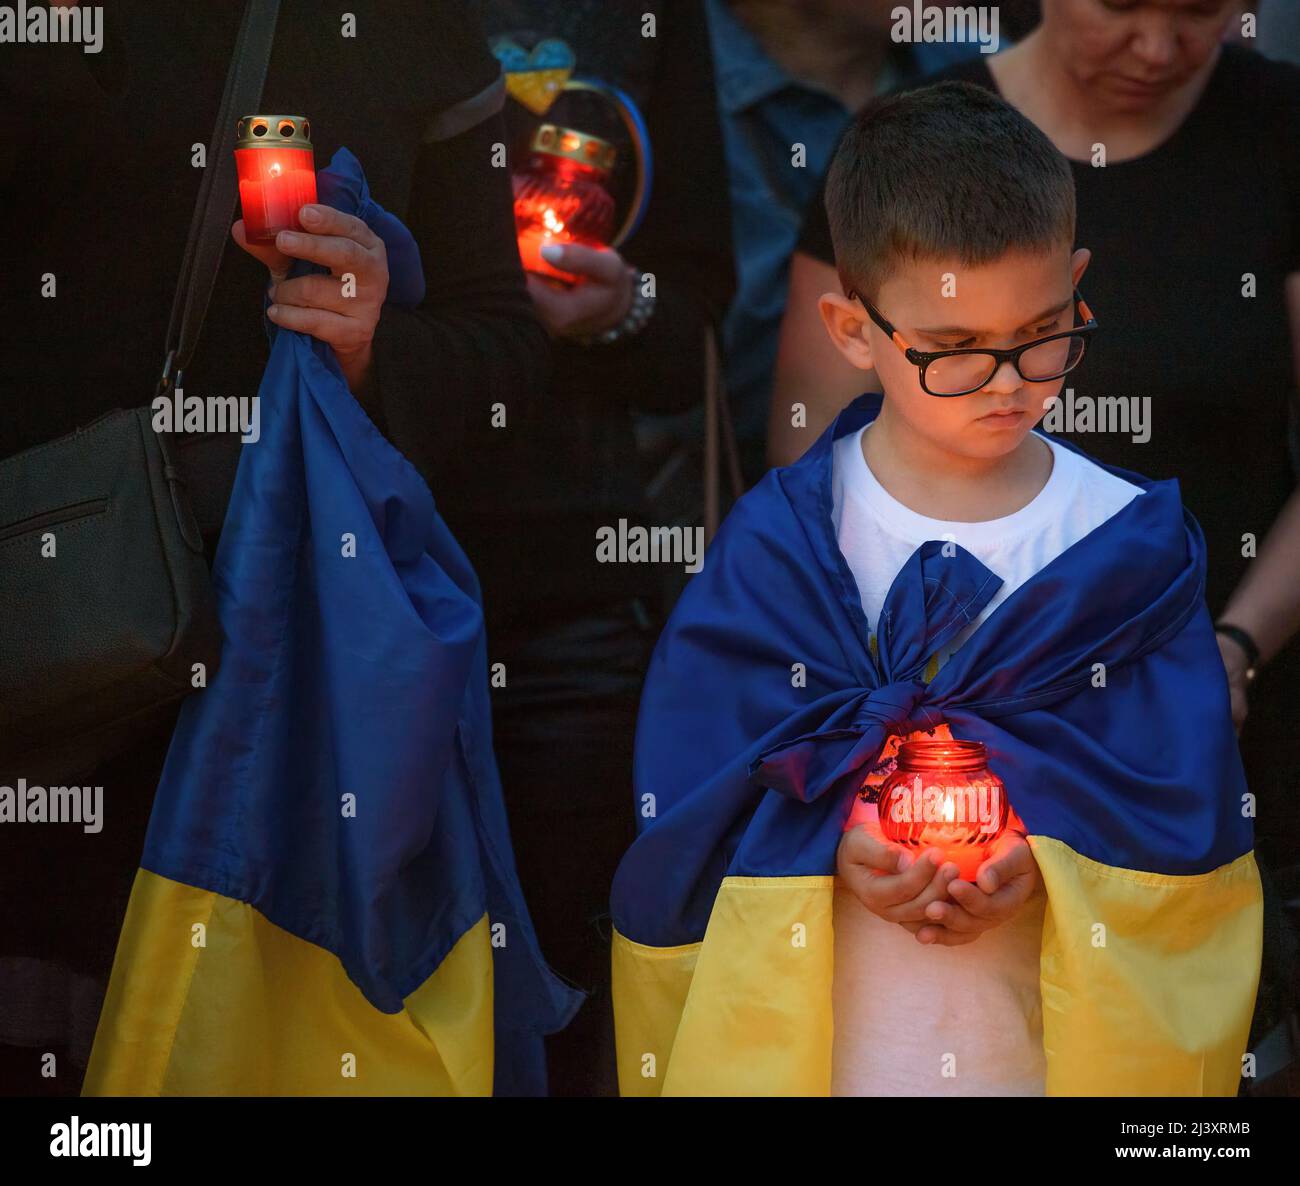 Limassol, Cyprus - April 5, 2022: Boy with a candle and flag of Ukraine during an event in memory of the Ukrainian victims killed in Bucha Stock Photo